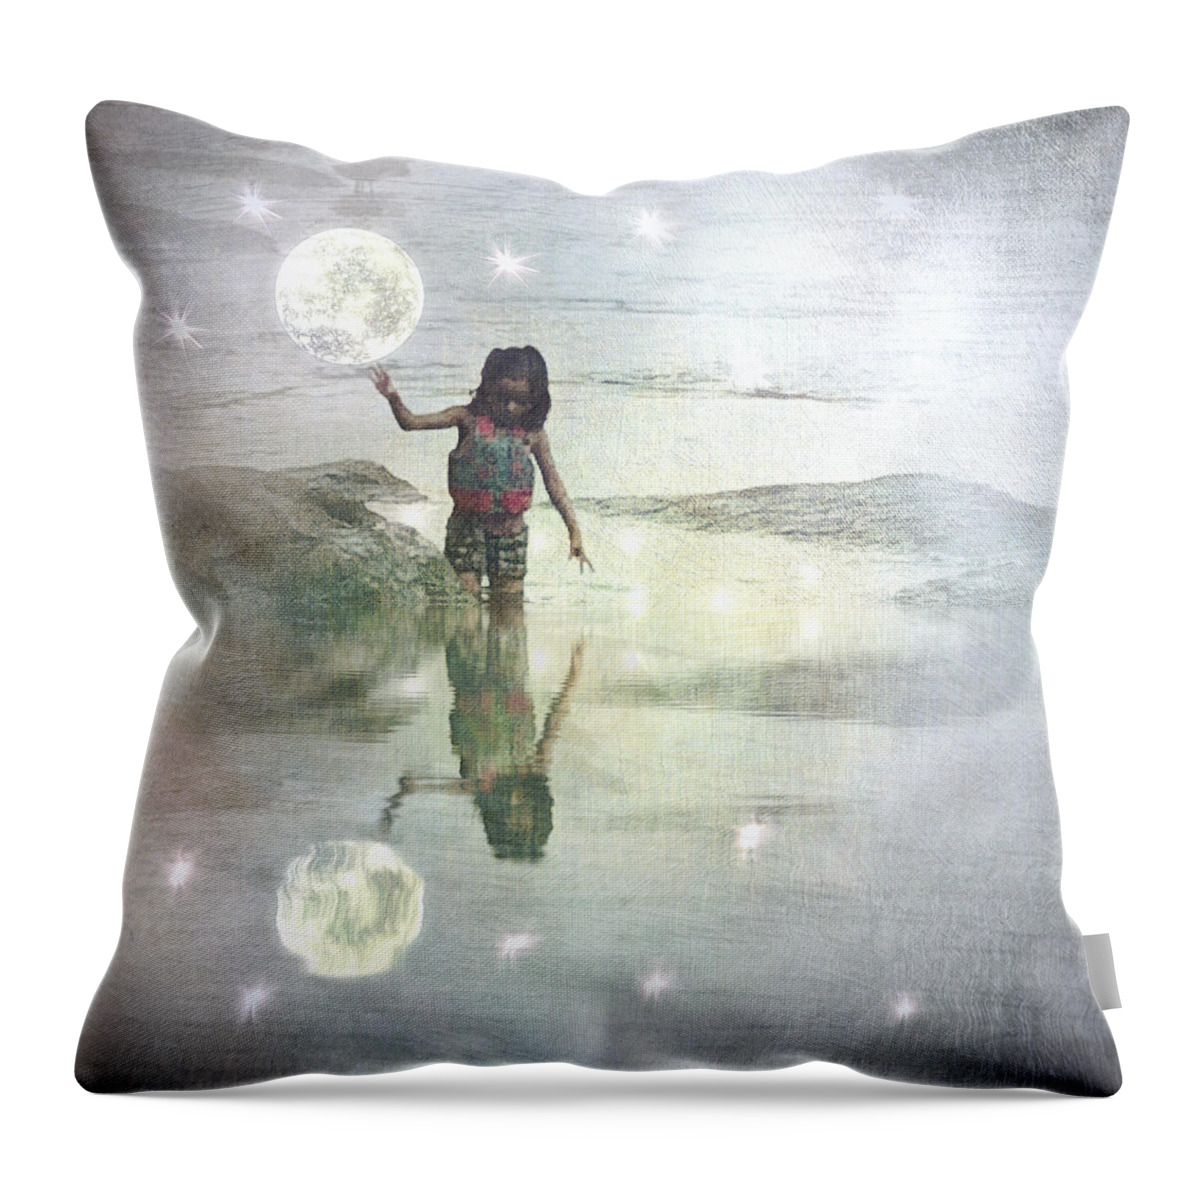 Girl Throw Pillow featuring the digital art To Touch the Moon by Melissa D Johnston